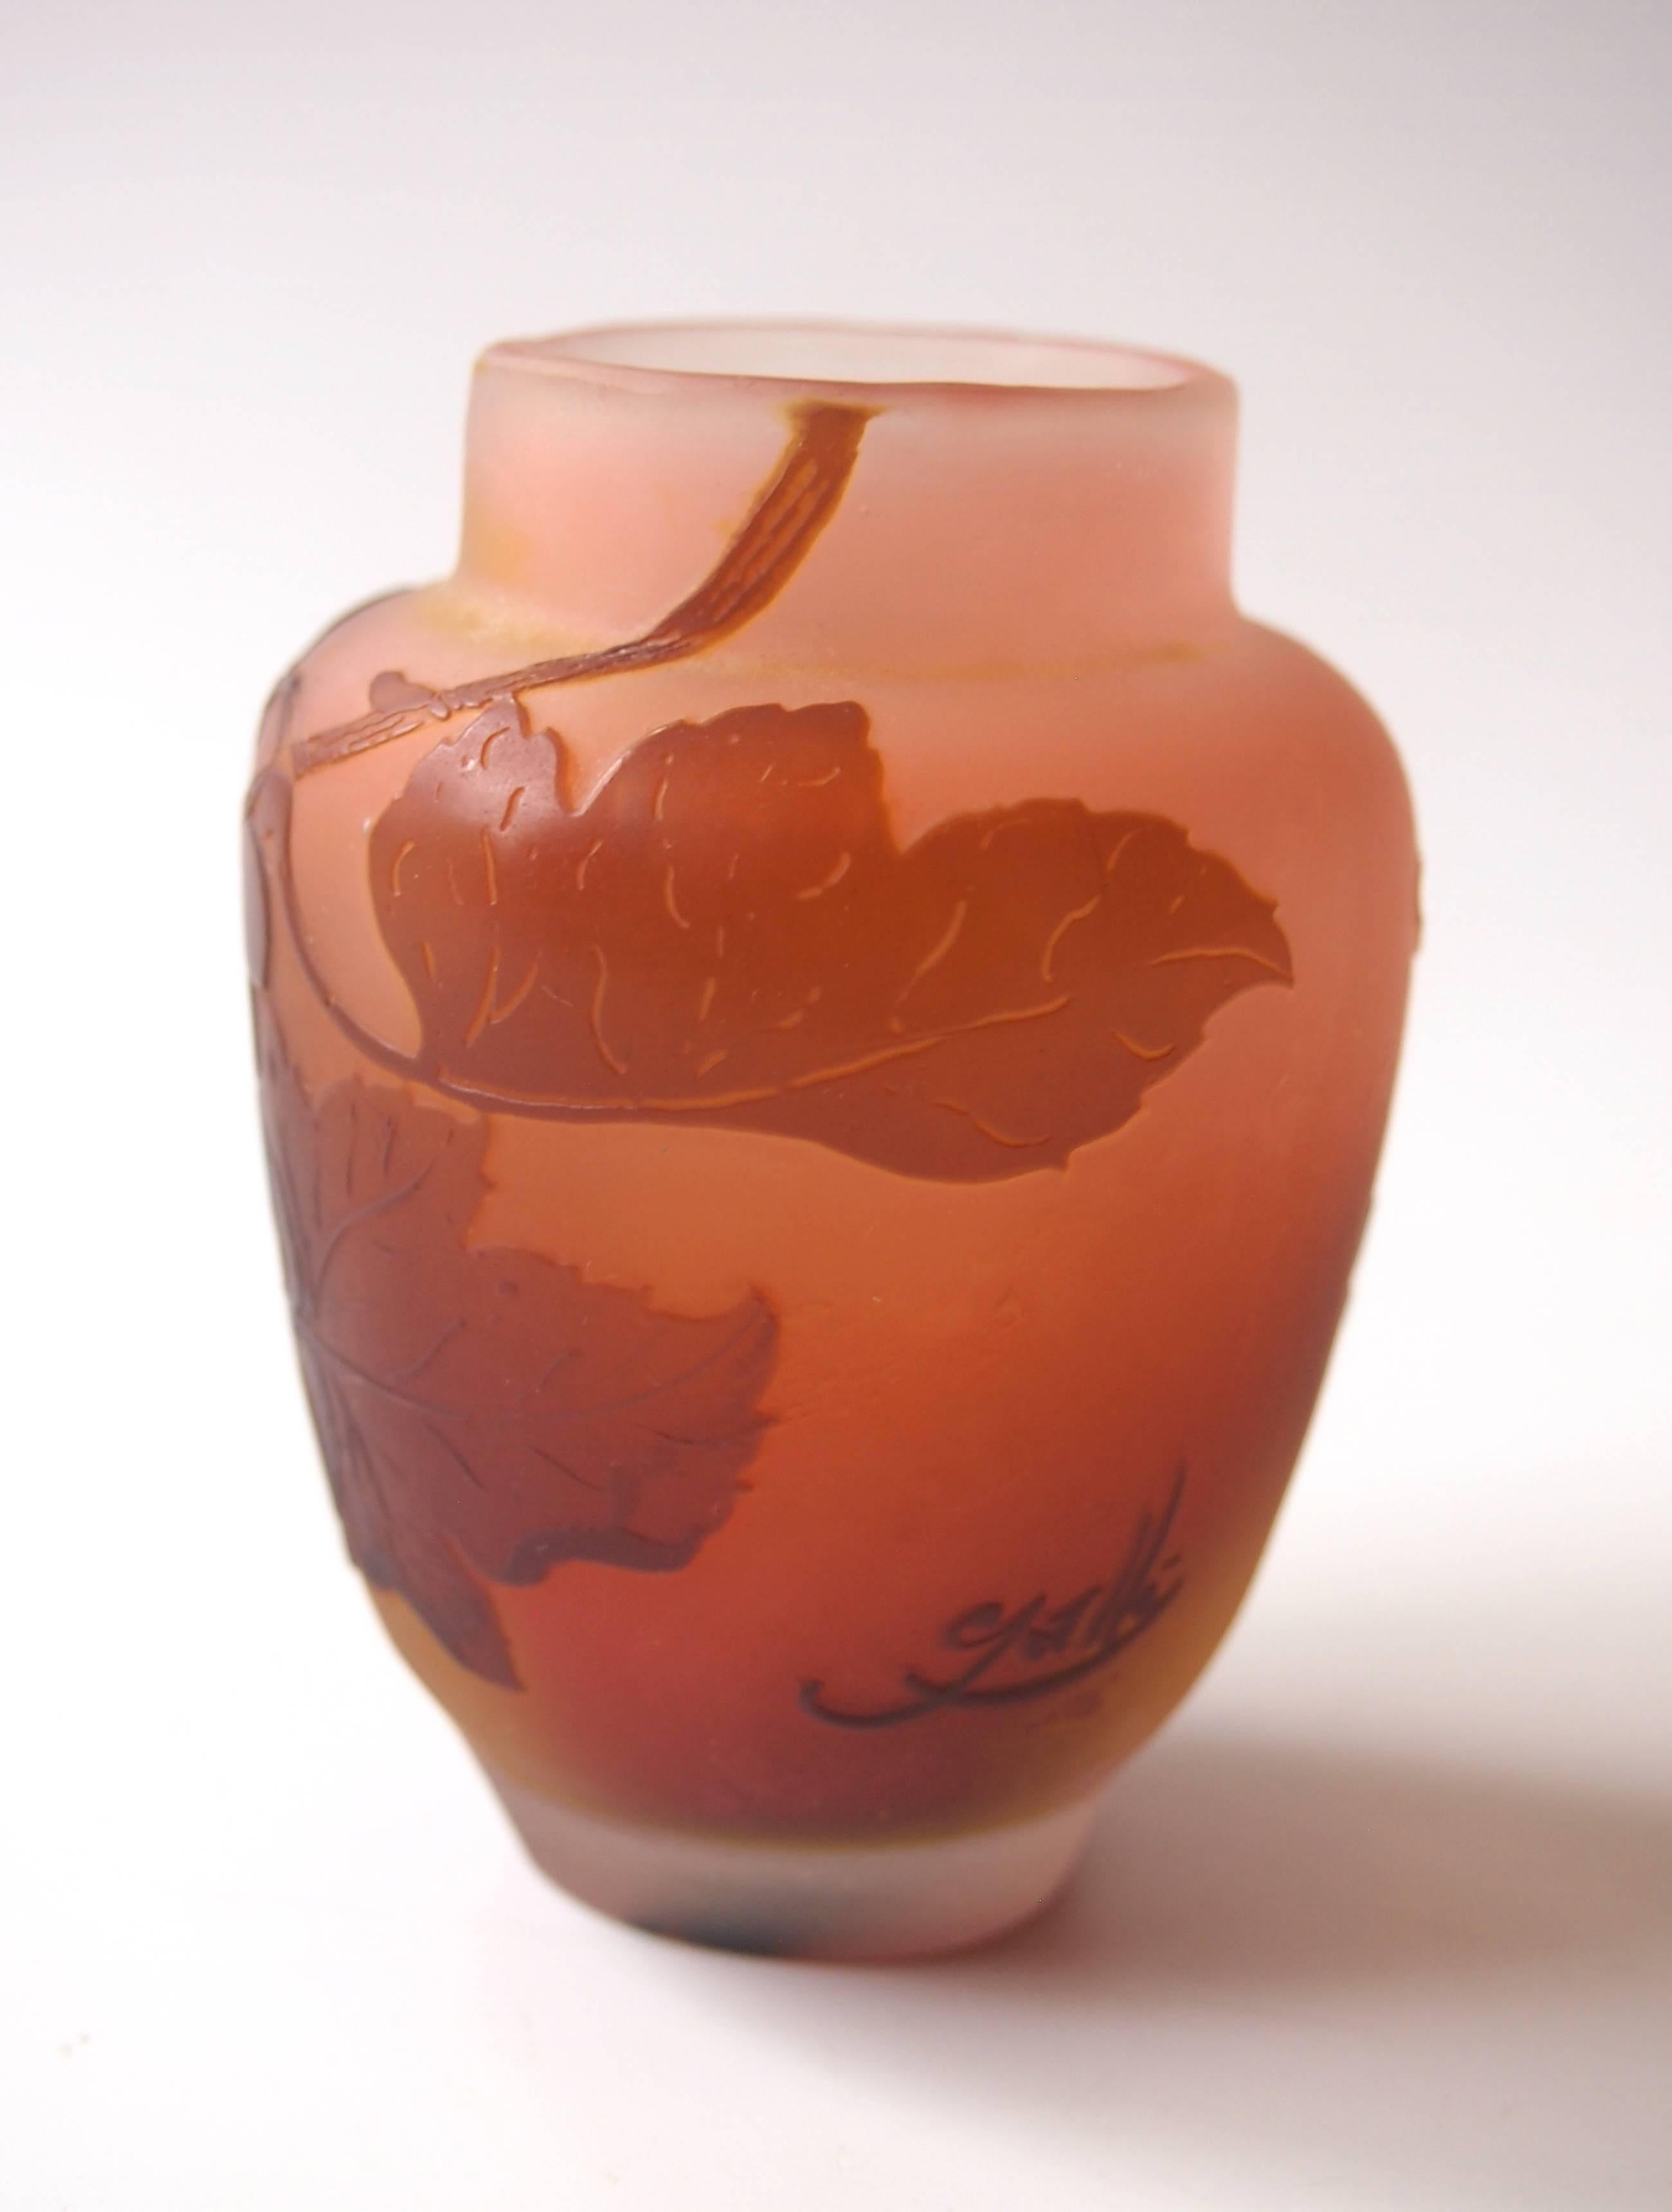 A very rare Art Nouveau Emile Galle Cameo miniature vase in brown over pink depicting sinuous grape vines signed in cameo, Galle loved trailing vines with twisty fronds and any botanical image where he could show off his skills as a fine cameo